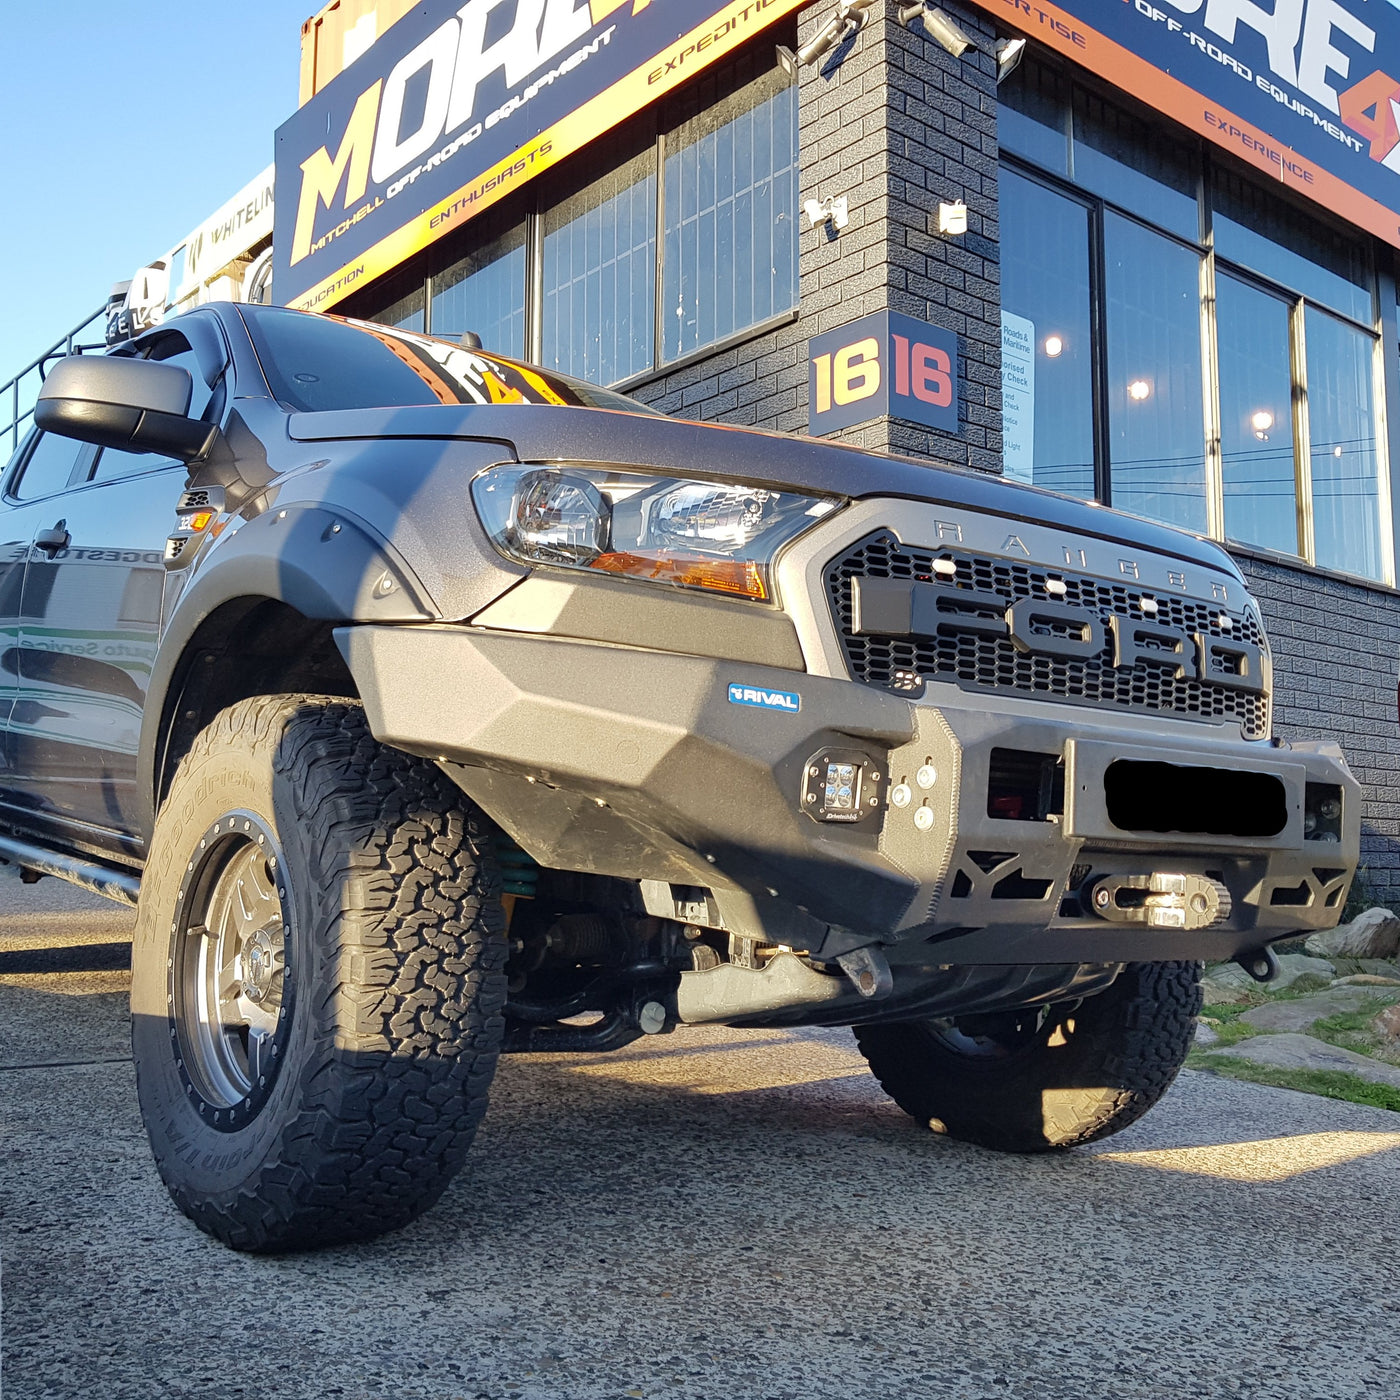 RIVAL 4x4 - Bumper - To suit FORD Ranger PX2/3 and FORD Everest - MORE 4x4